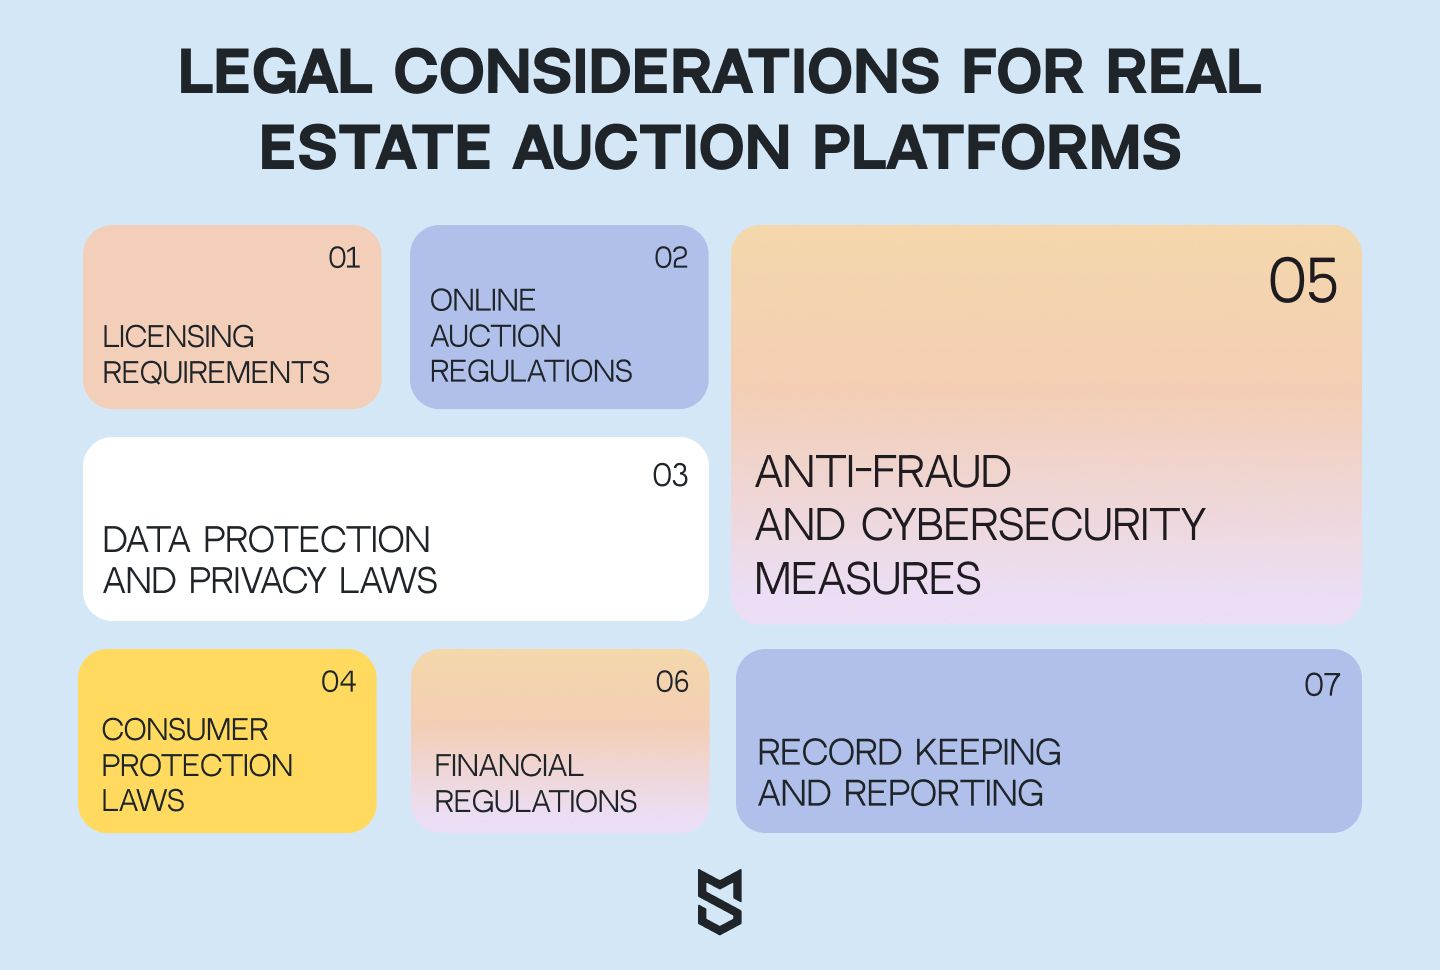 Legal considerations for real estate auction platforms